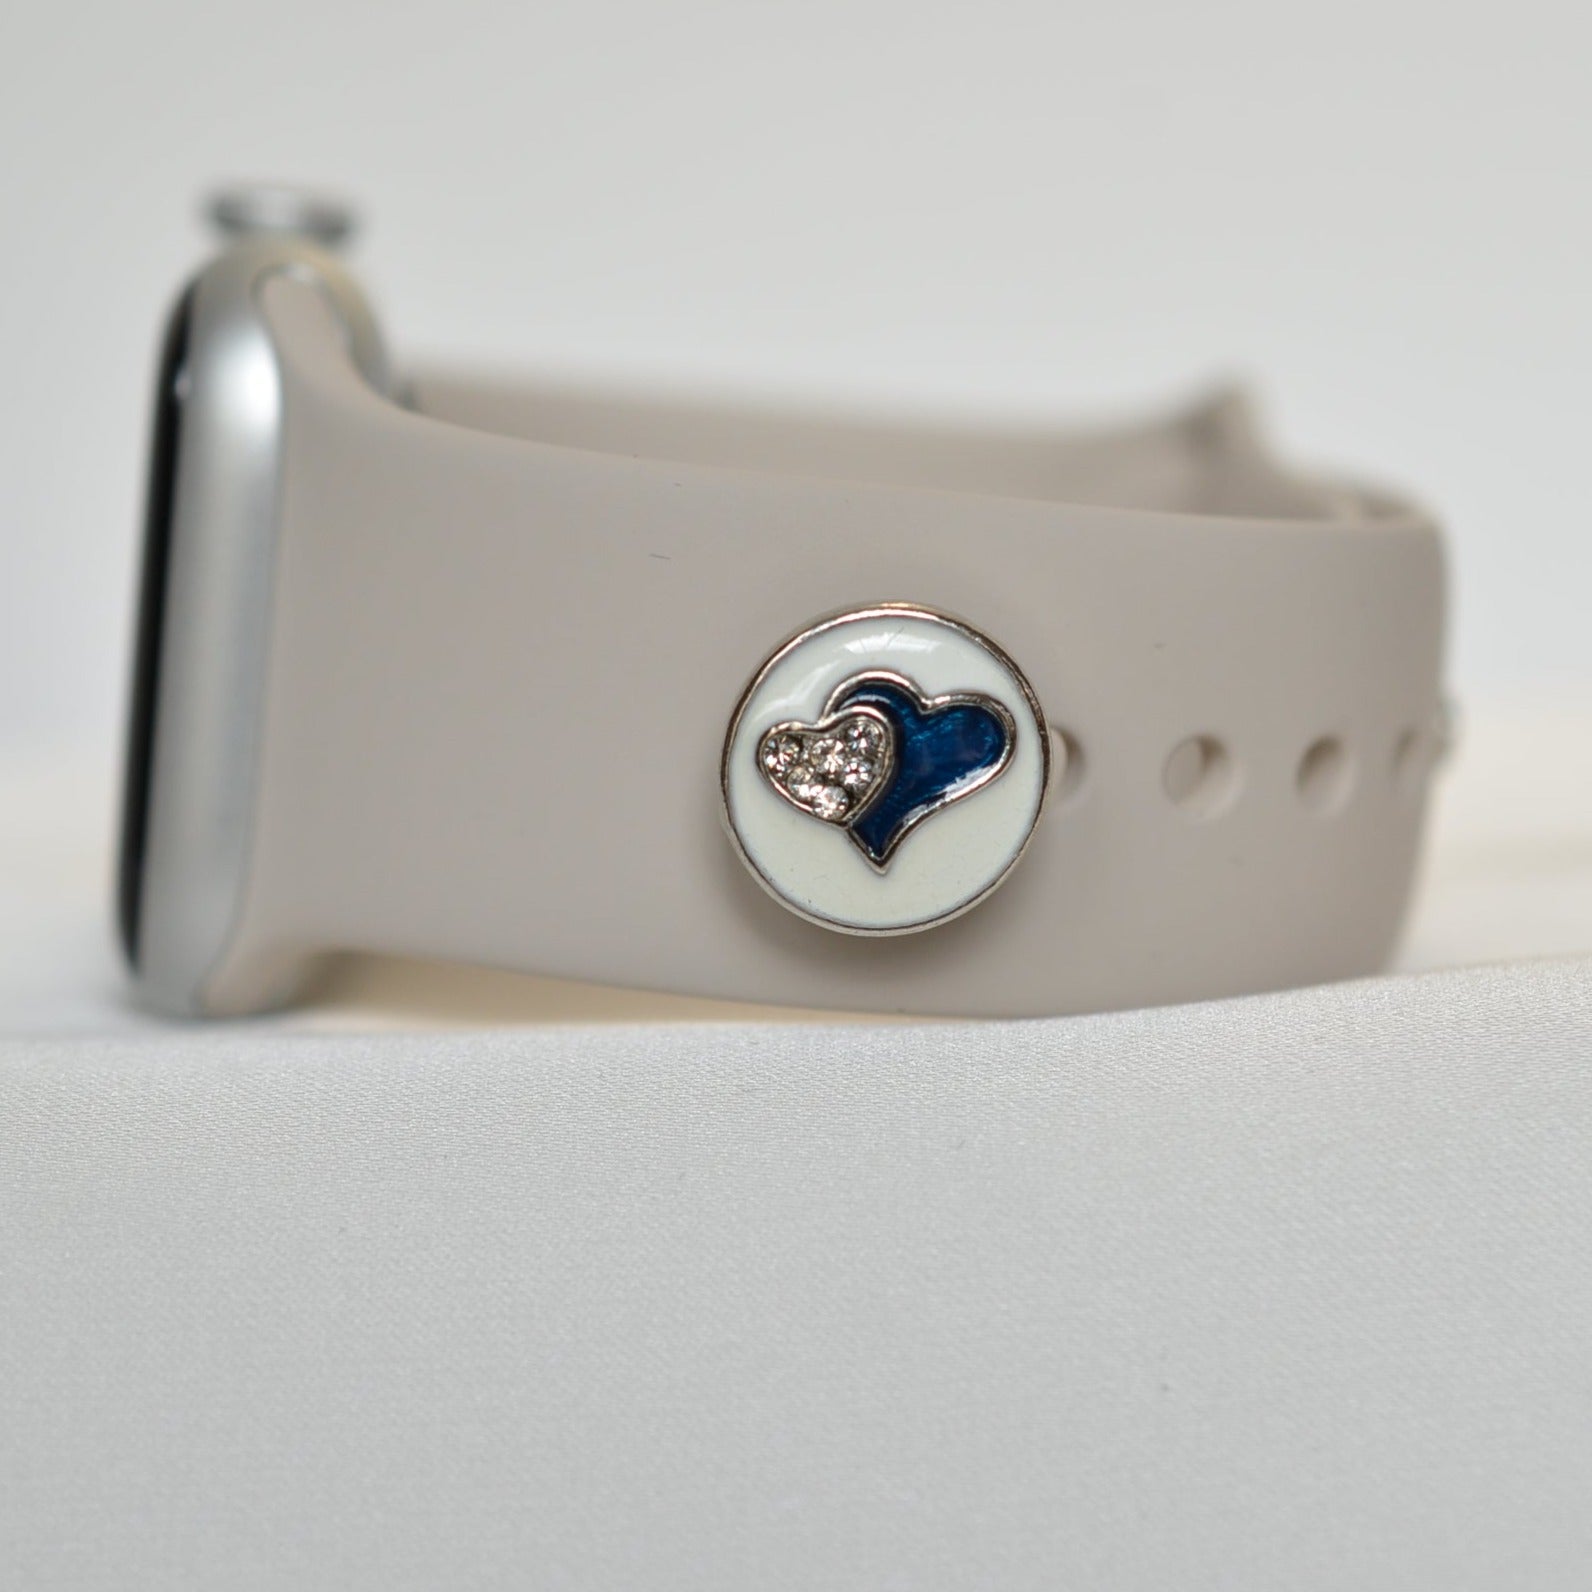 Blue Double Heart Charm for belts, bags and watch band charms